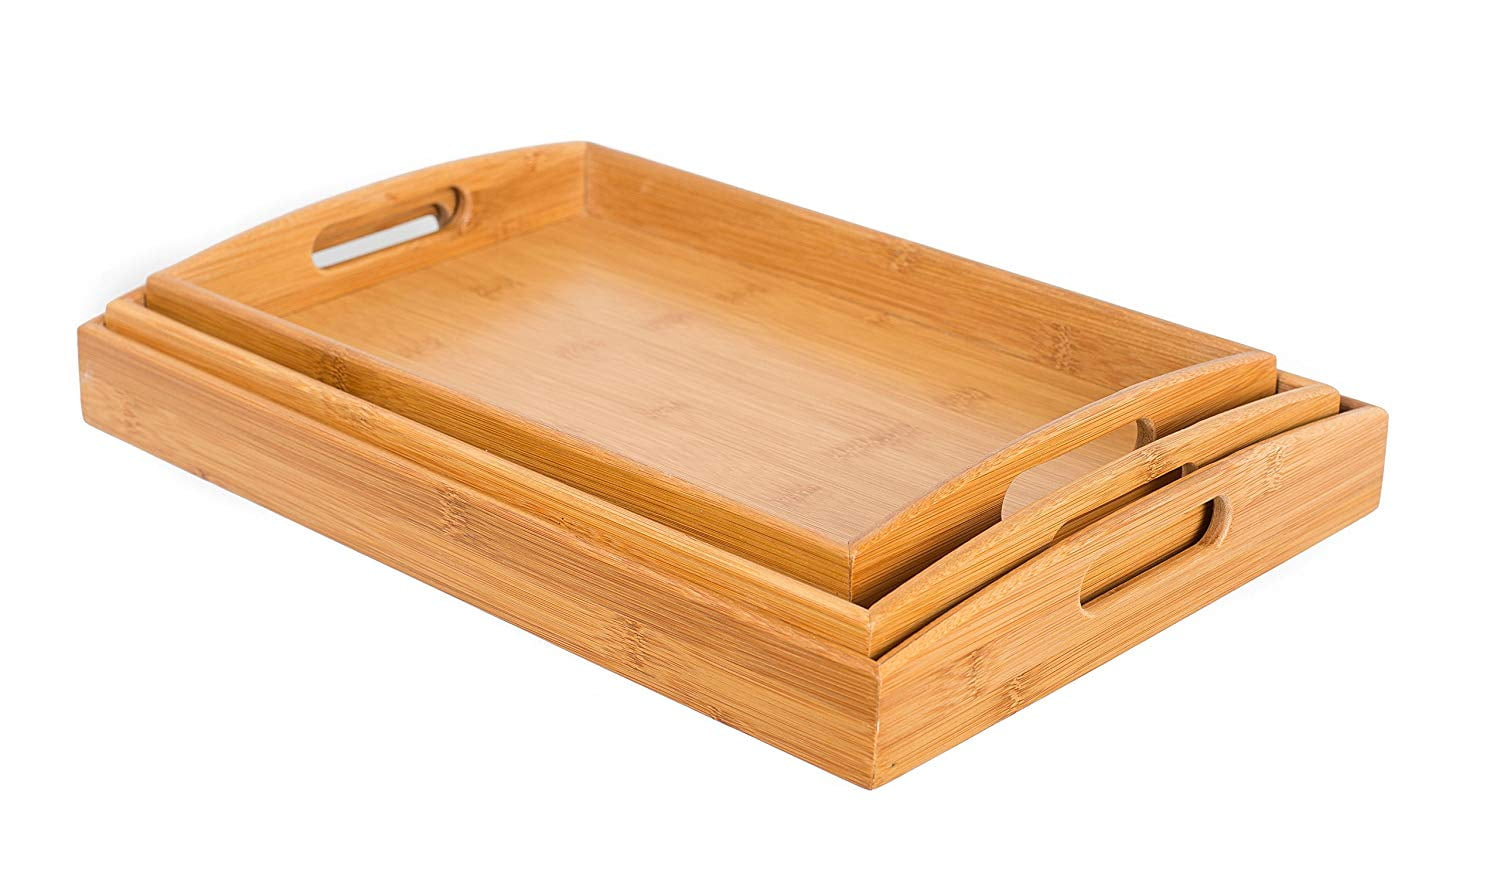 NEW Totally Bamboo Butlers Tray FREE SHIPPING 